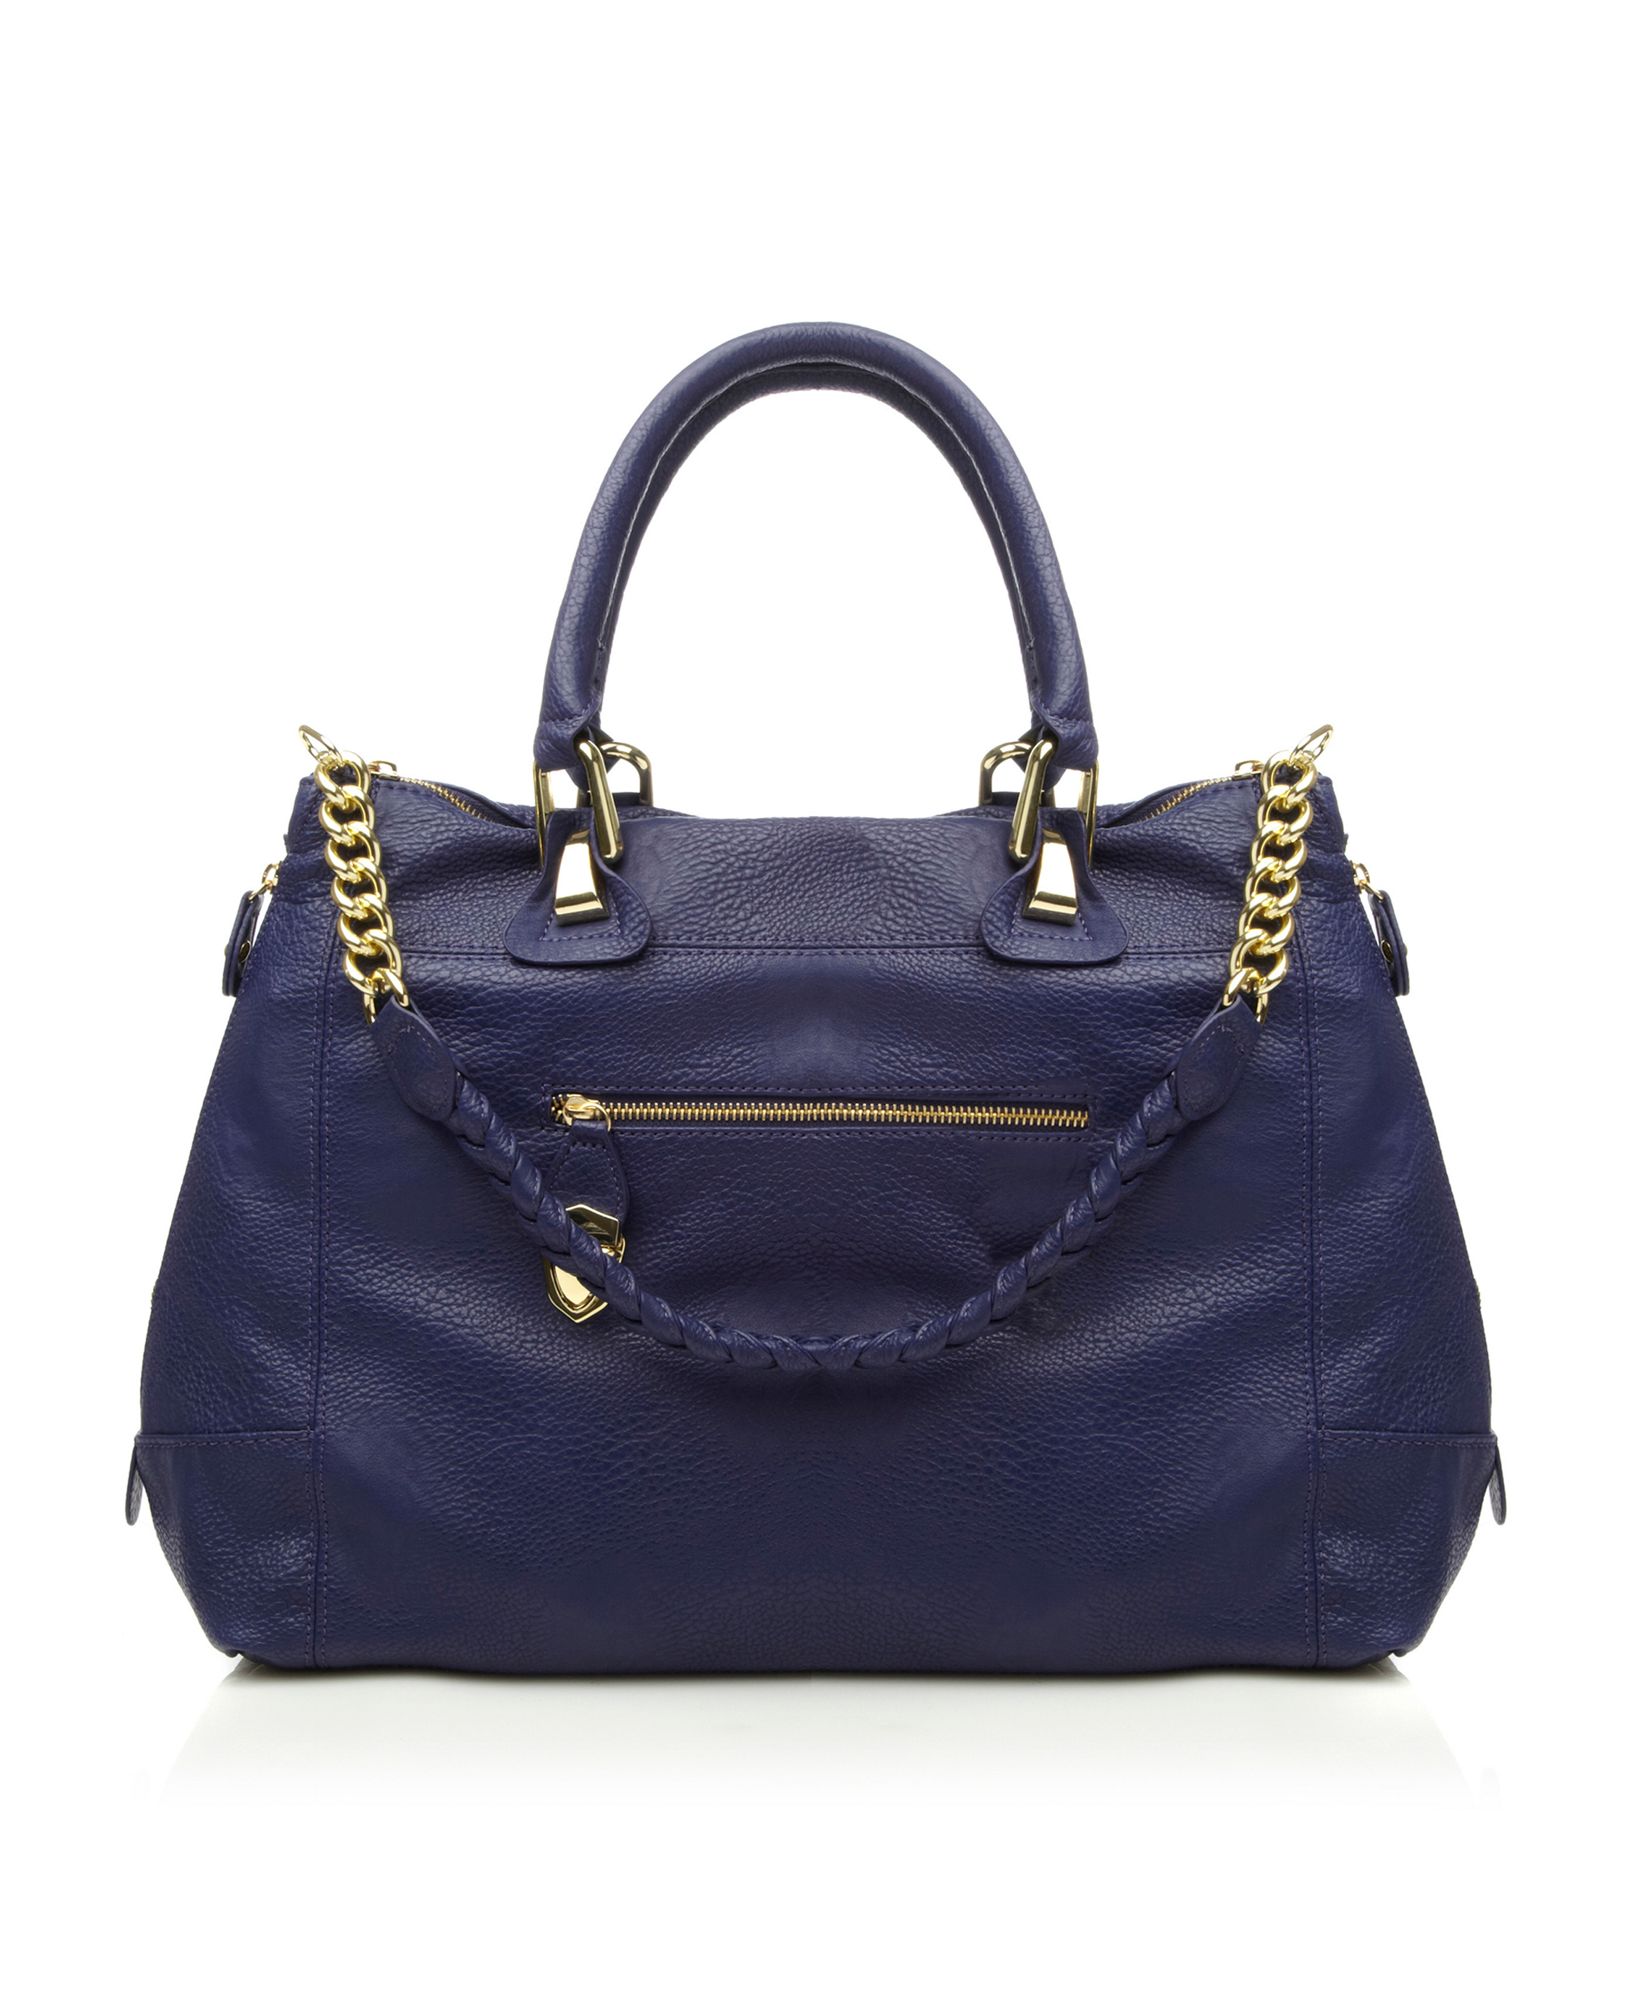 Steve Madden B Sociall Sm Chain Handle Tote Bag in Blue | Lyst